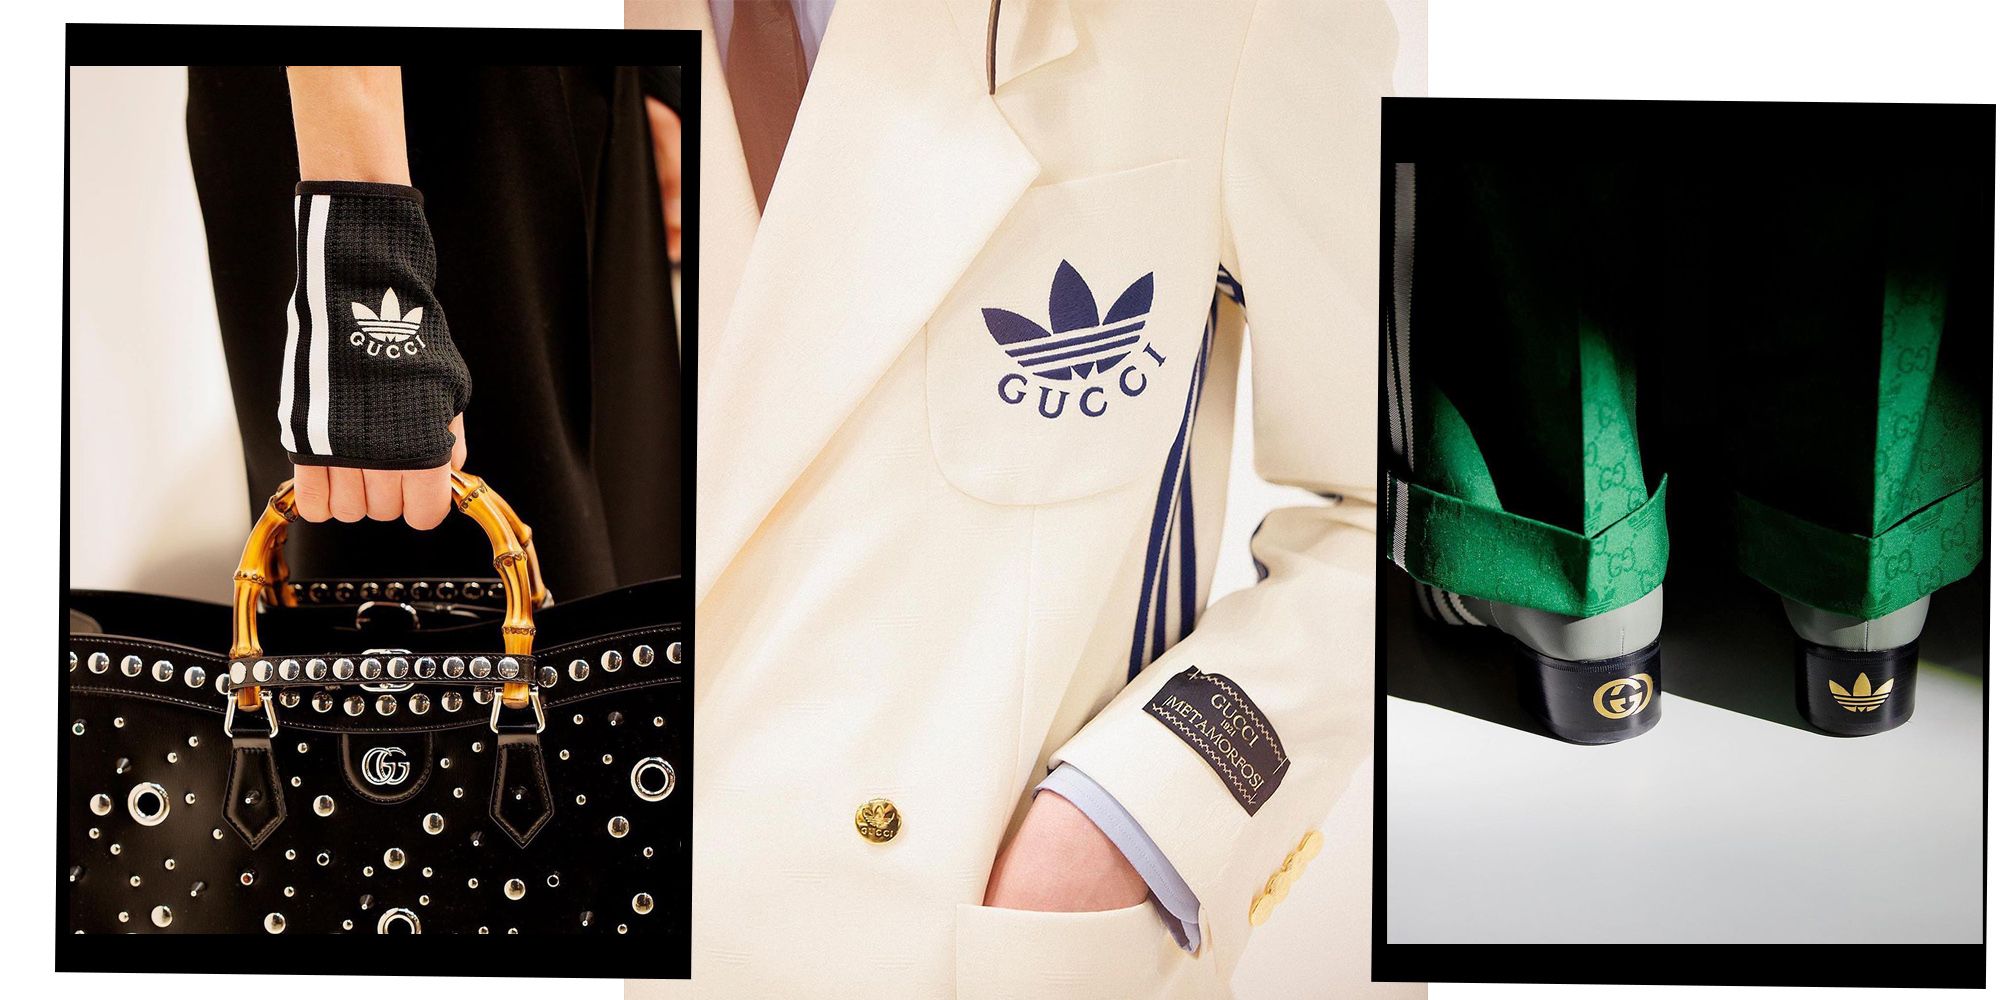 Adiducci? Guccidas? Either way we're all in to Adidas X Gucci